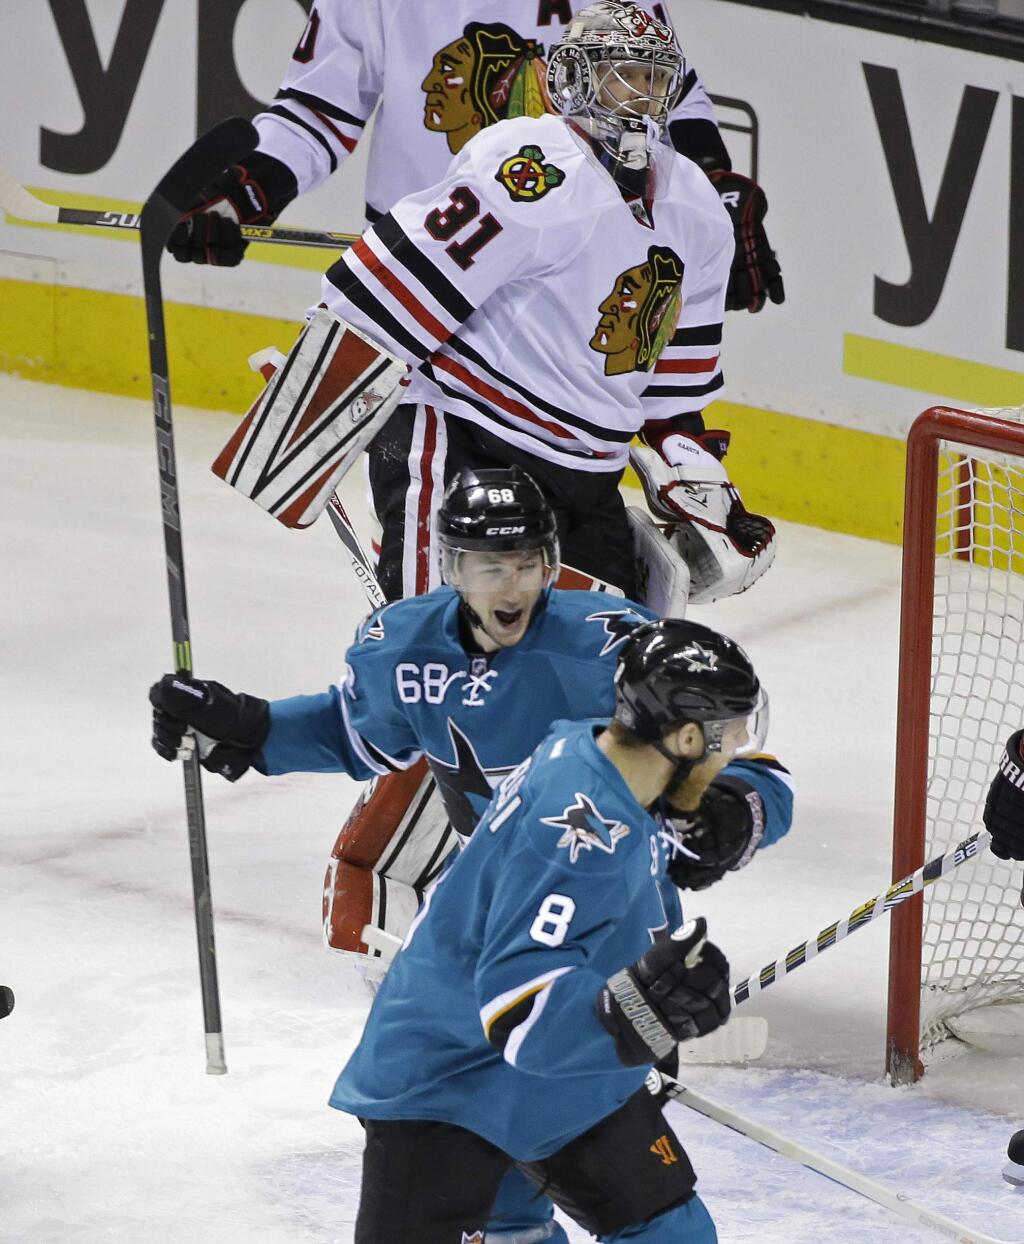 San Jose Sharks right wing Melker Karlsson (68) celebrates with teammate Joe Pavelski (8) after scoring a goal against Chicago Blackhawks goalie Antti Raanta (31) during the first period of their NHL hockey game Saturday, Jan. 31, 2015, in San Jose, Calif. (AP Photo/Eric Risberg)